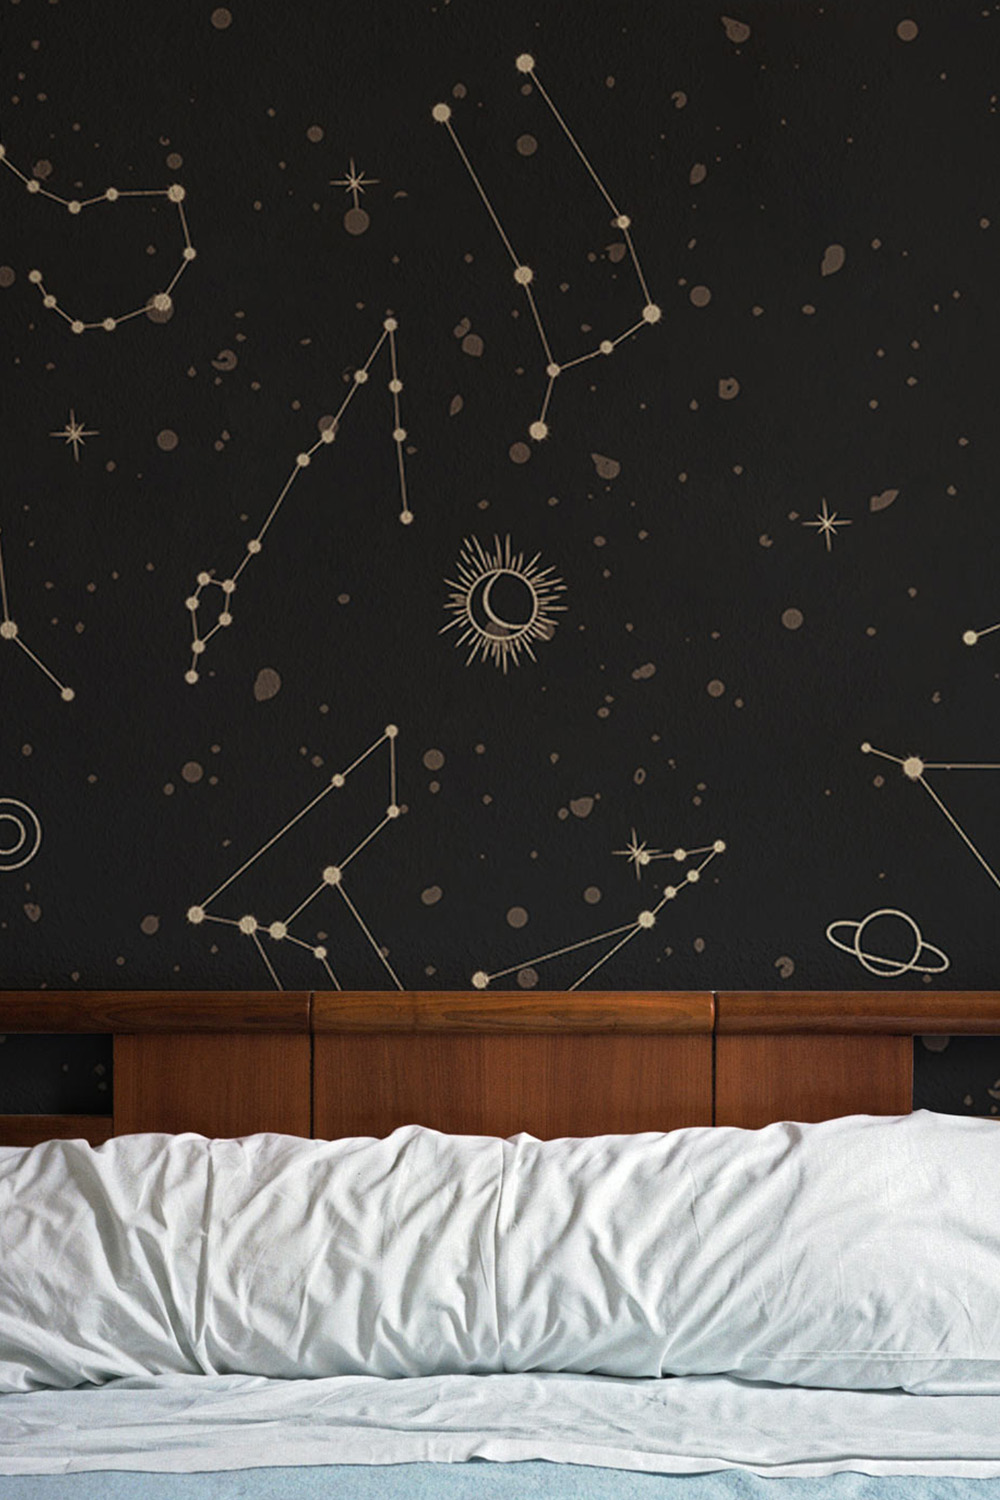 5 latest unique space galaxy wallpaper for a kids room - Style Curator